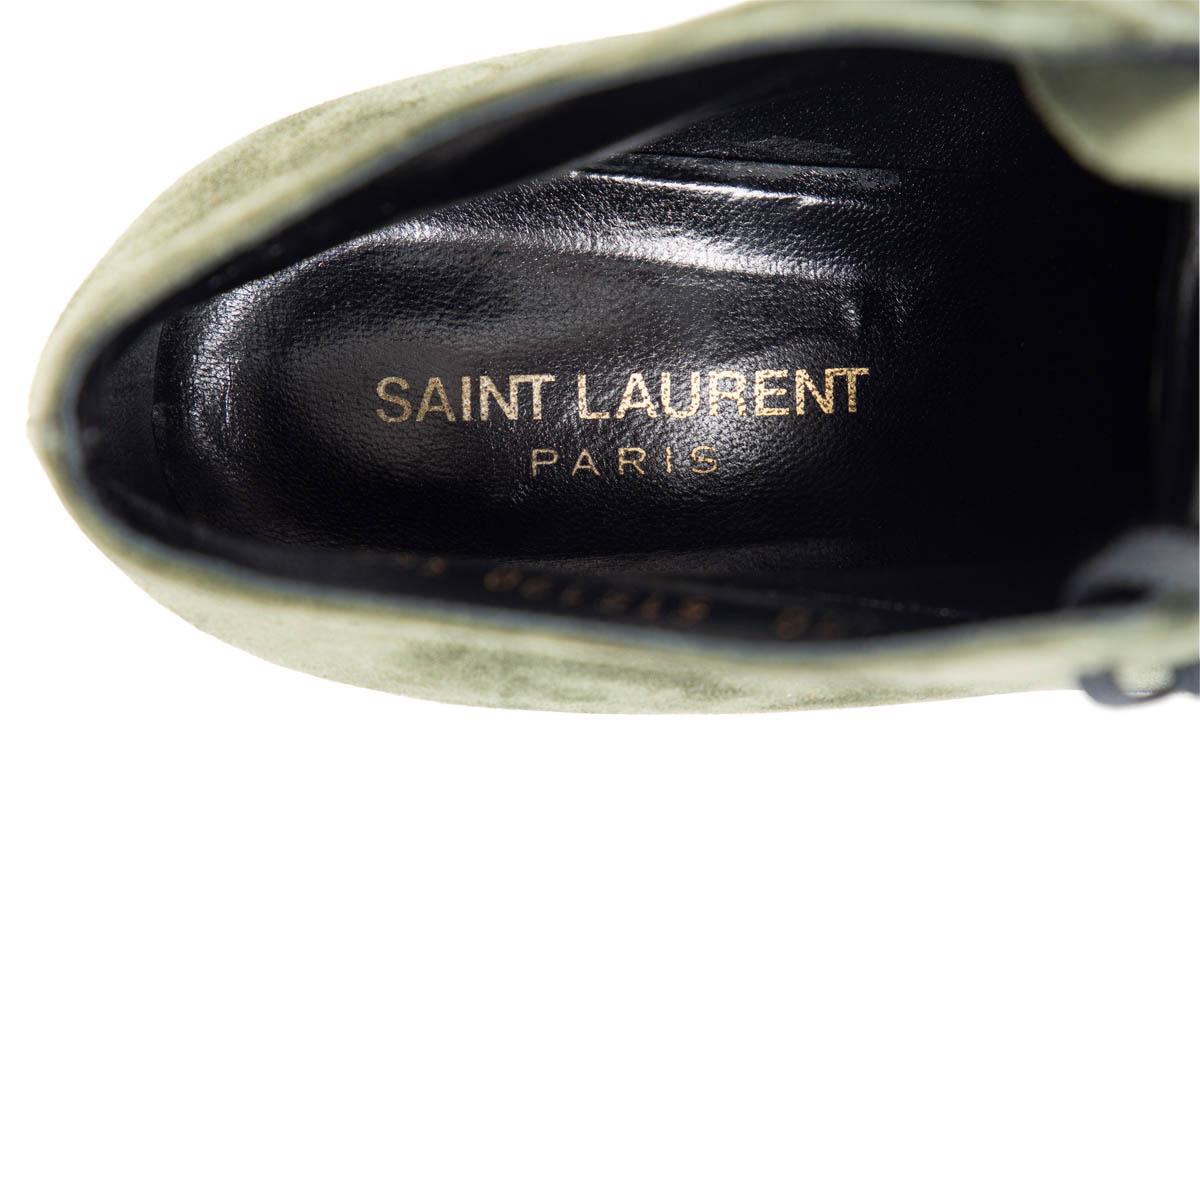 SAINT LAURENT military green suede ERA 85 Ankle Boots Shoes 39.5 For Sale 1